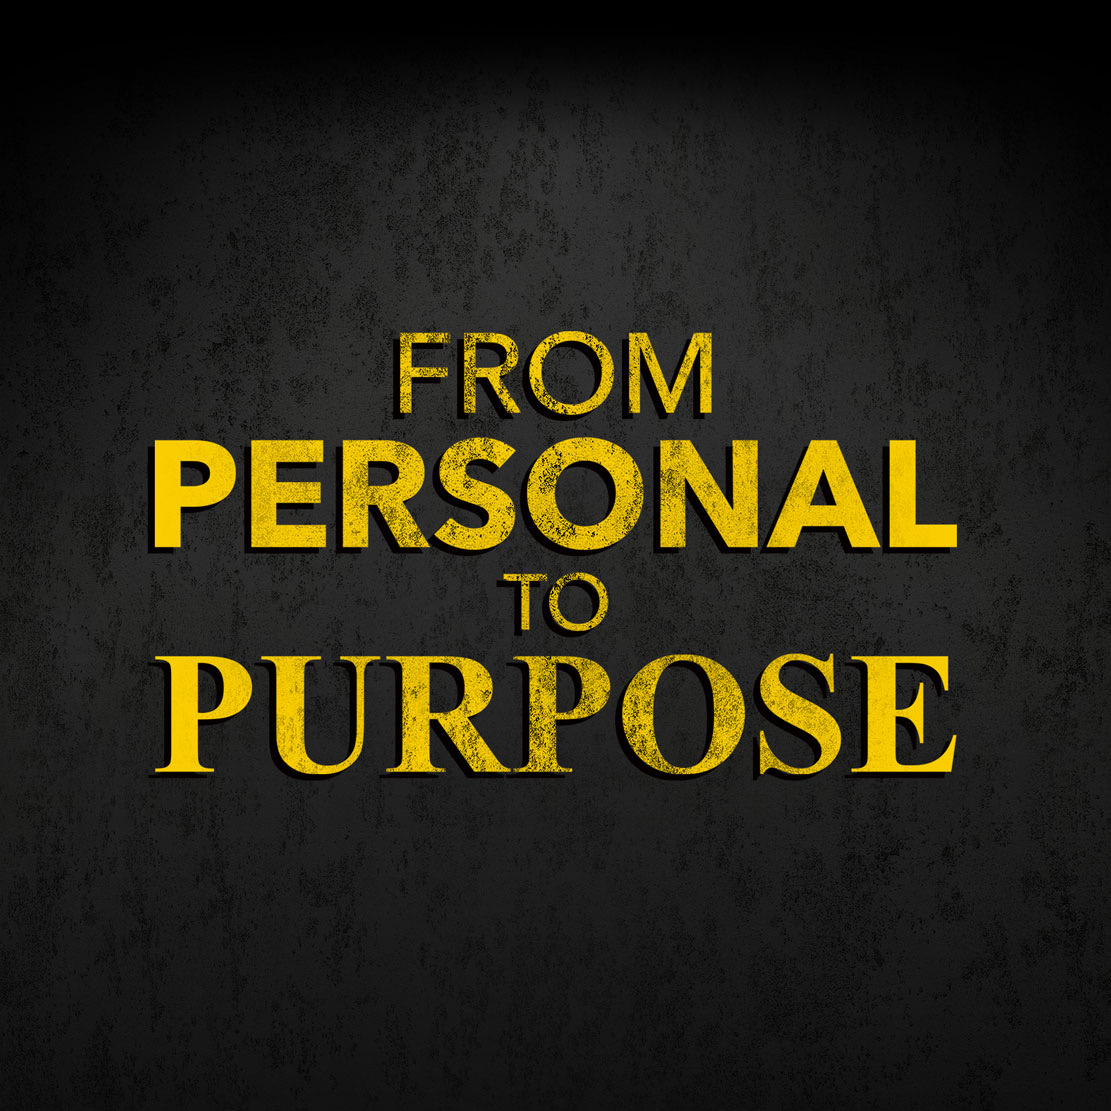 From Personal to Purpose